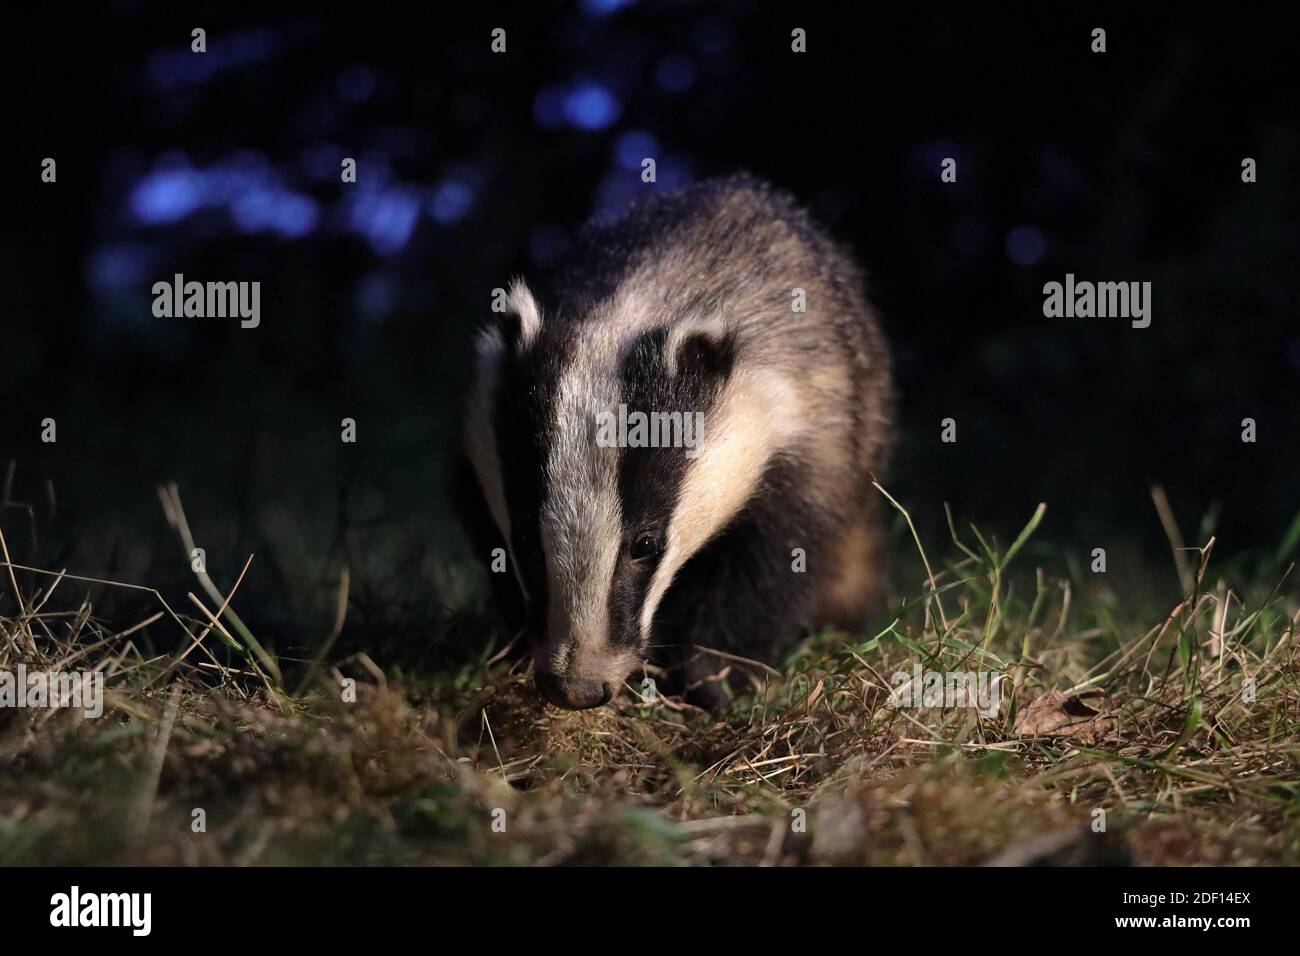 The European badger, also known as the Eurasian badger, is a badger species in the family Mustelidae native to almost all of Europe. Stock Photo